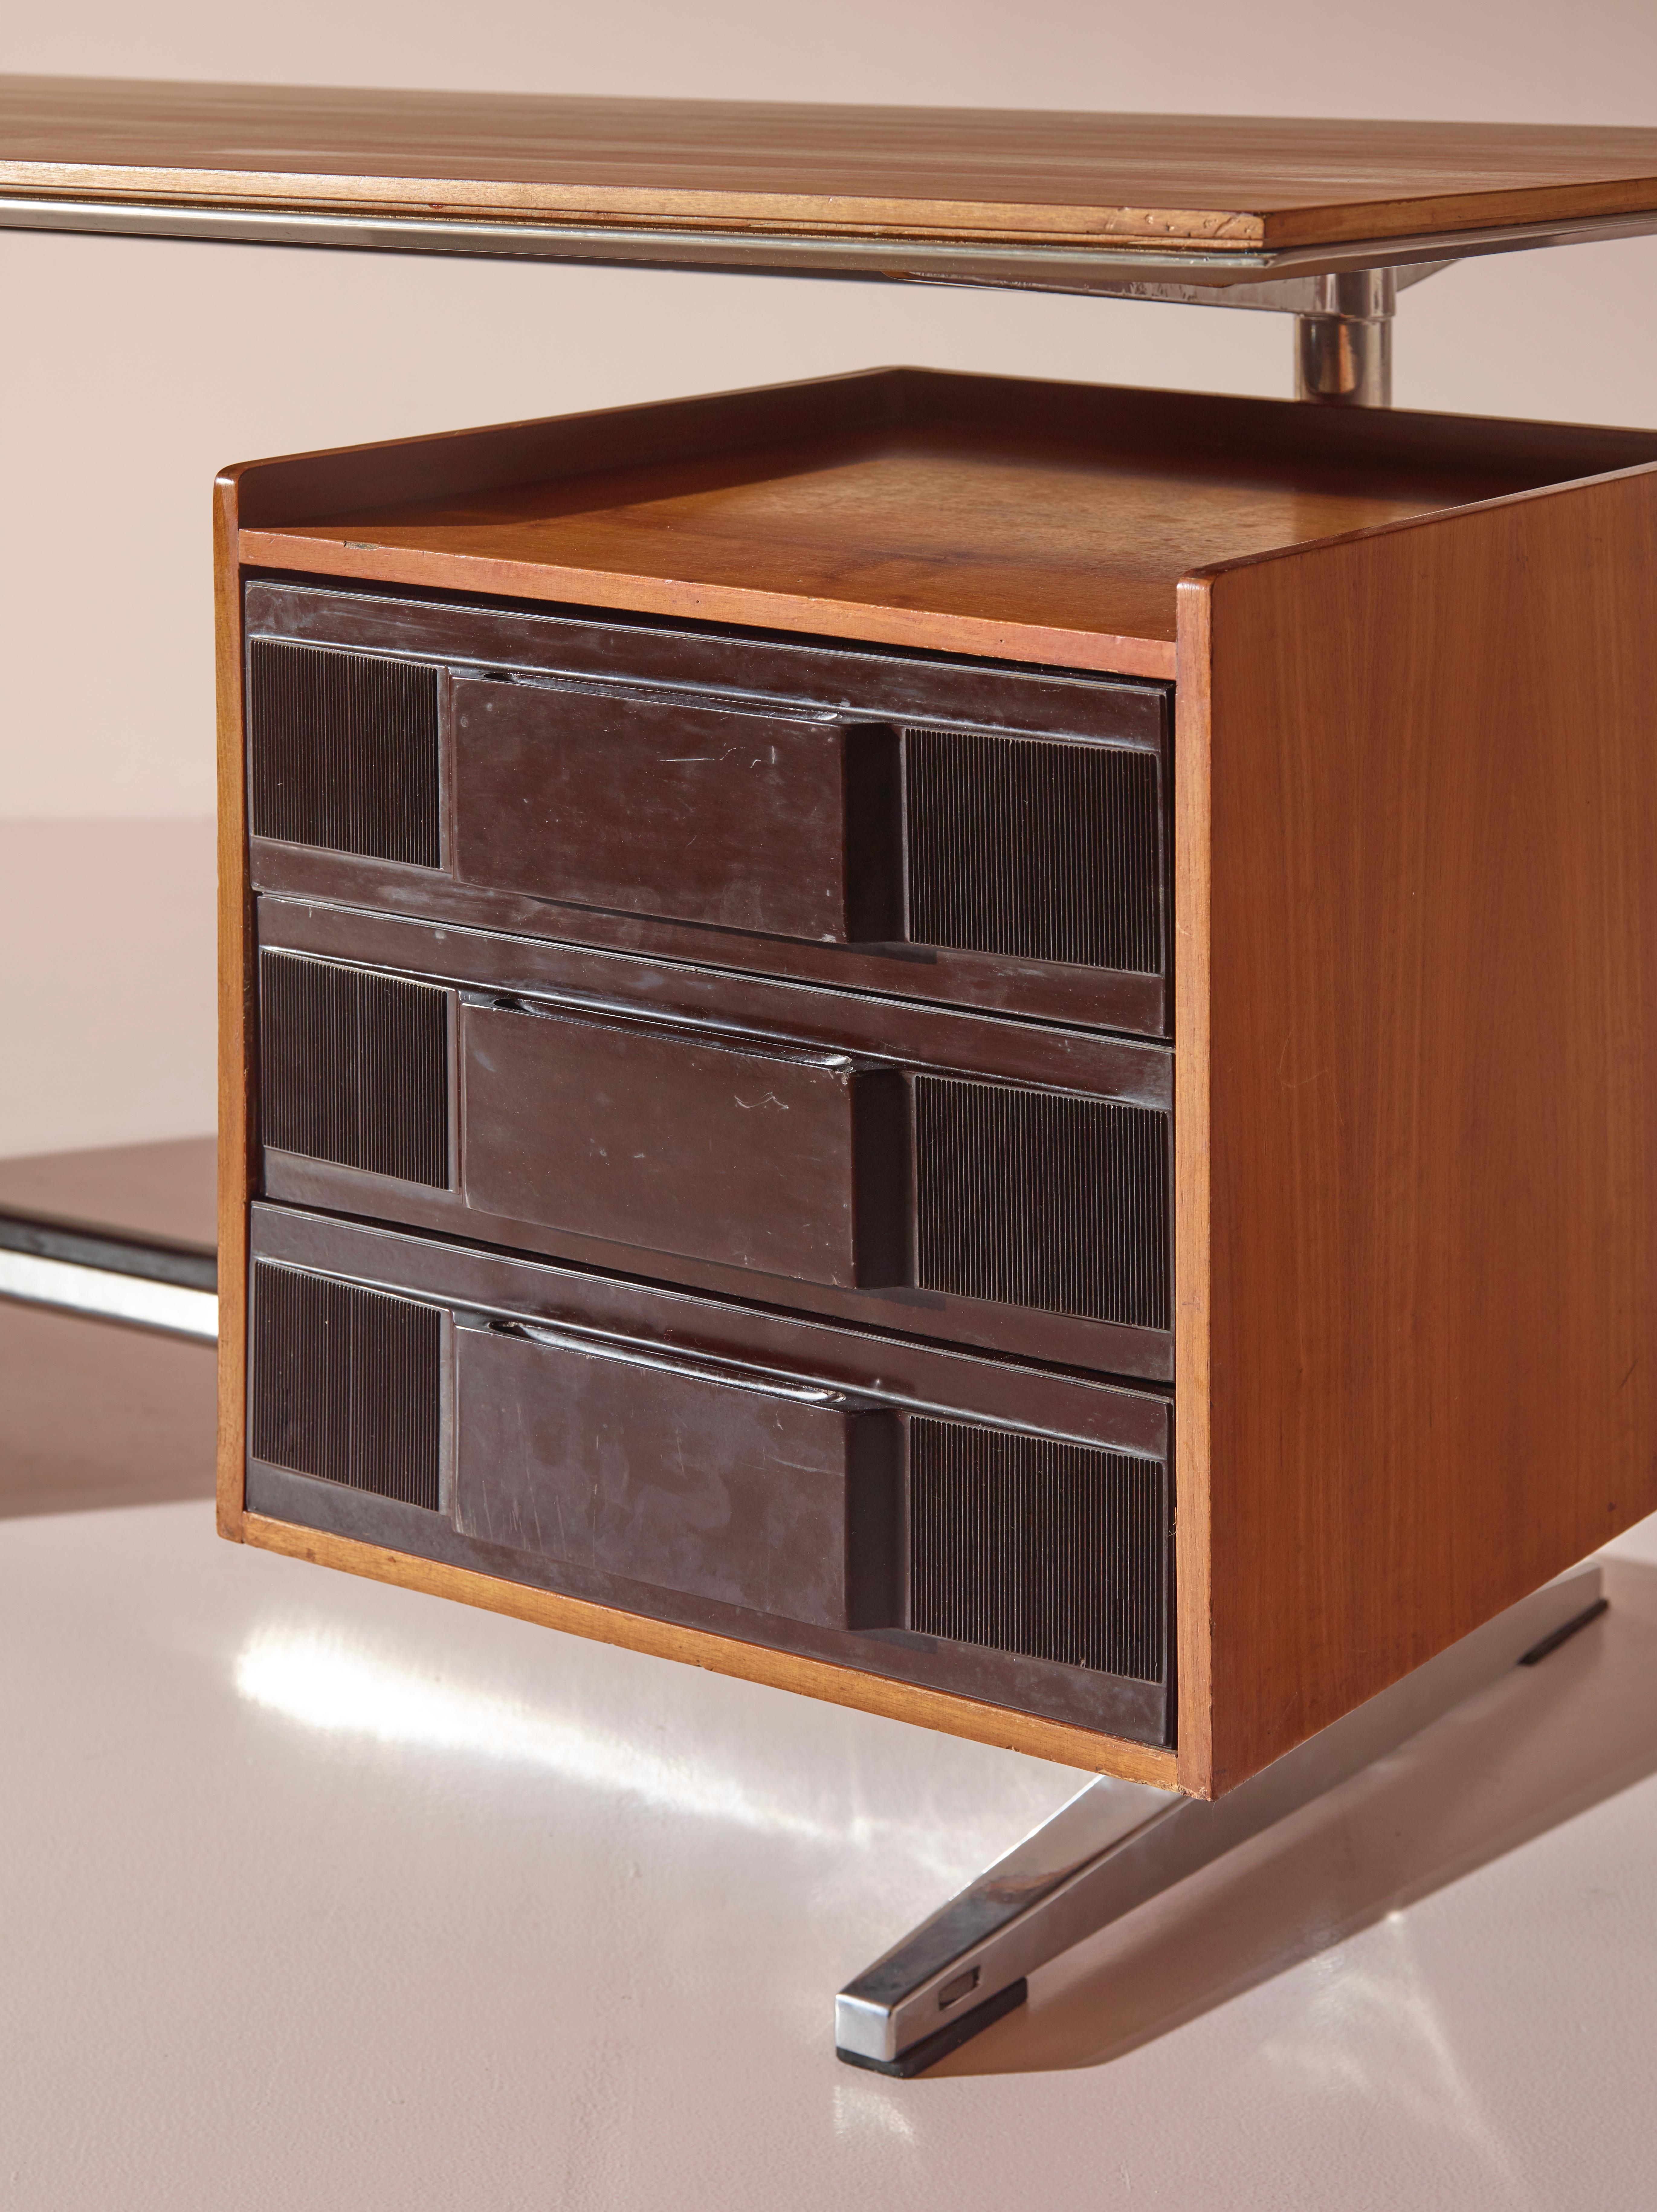 Italian Gio Ponti Desk for RIMA Made in Walnut, Chromed Steel and Plastic. Italy, 1950s For Sale